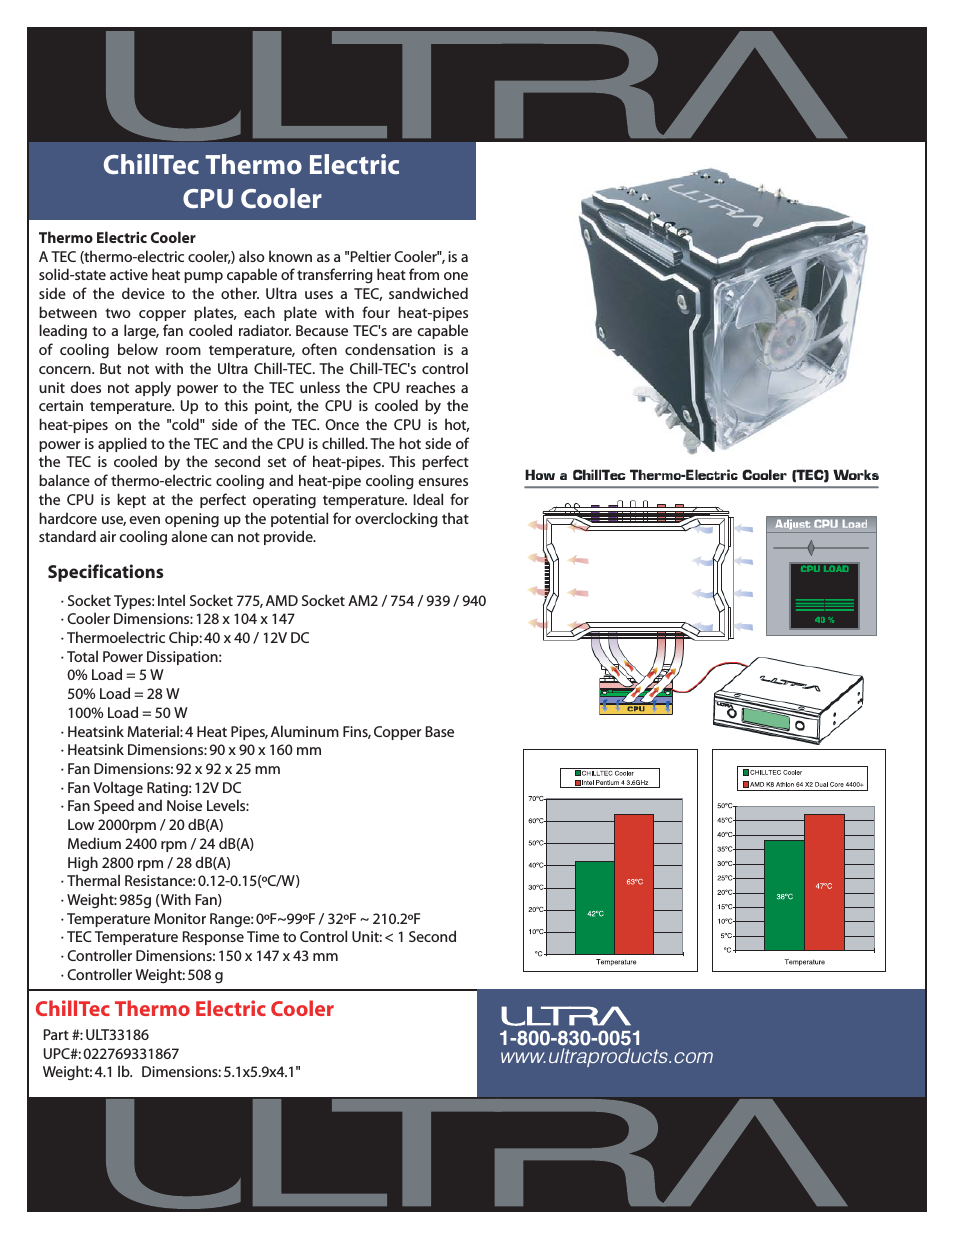 ChillTec Thermo Electric Cooler ULT33186